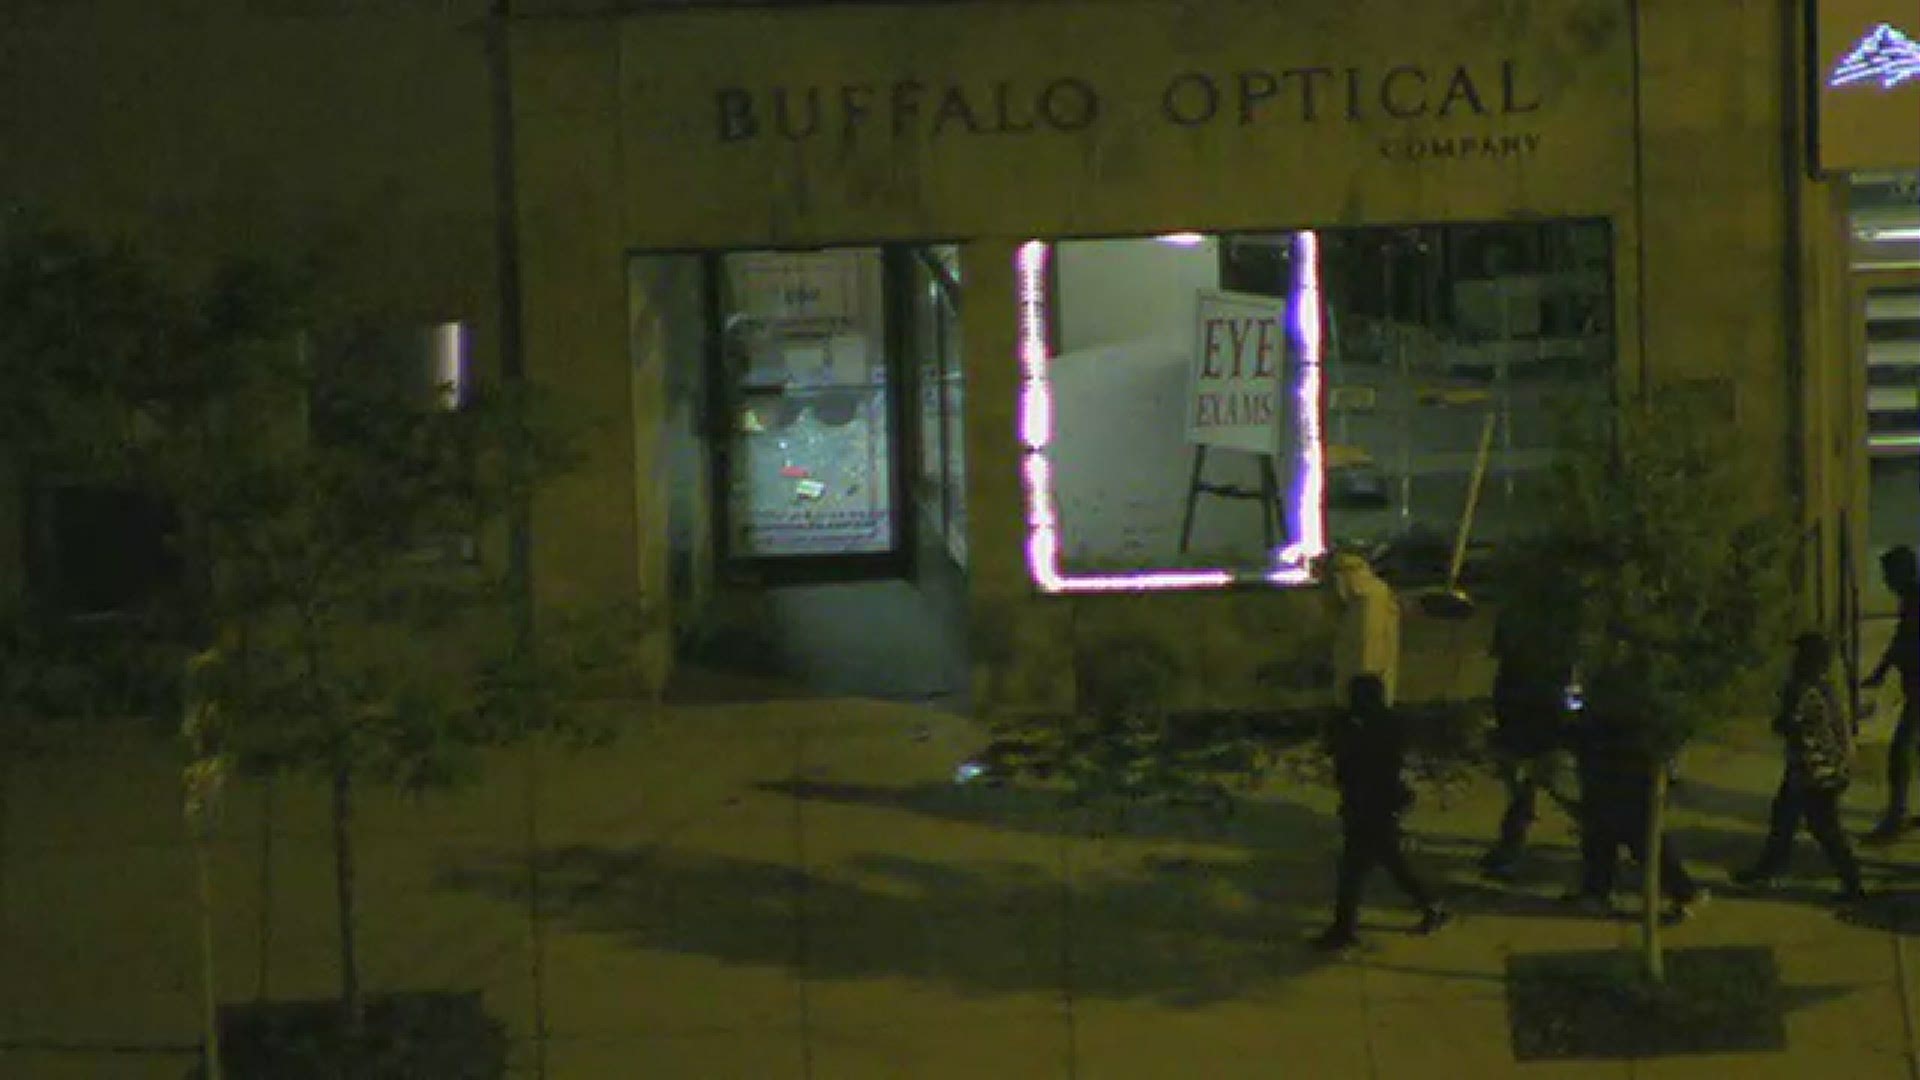 Buffalo Optical was vandalized during protest. While most people walked by the damaged building, at least one person was seen inside the building